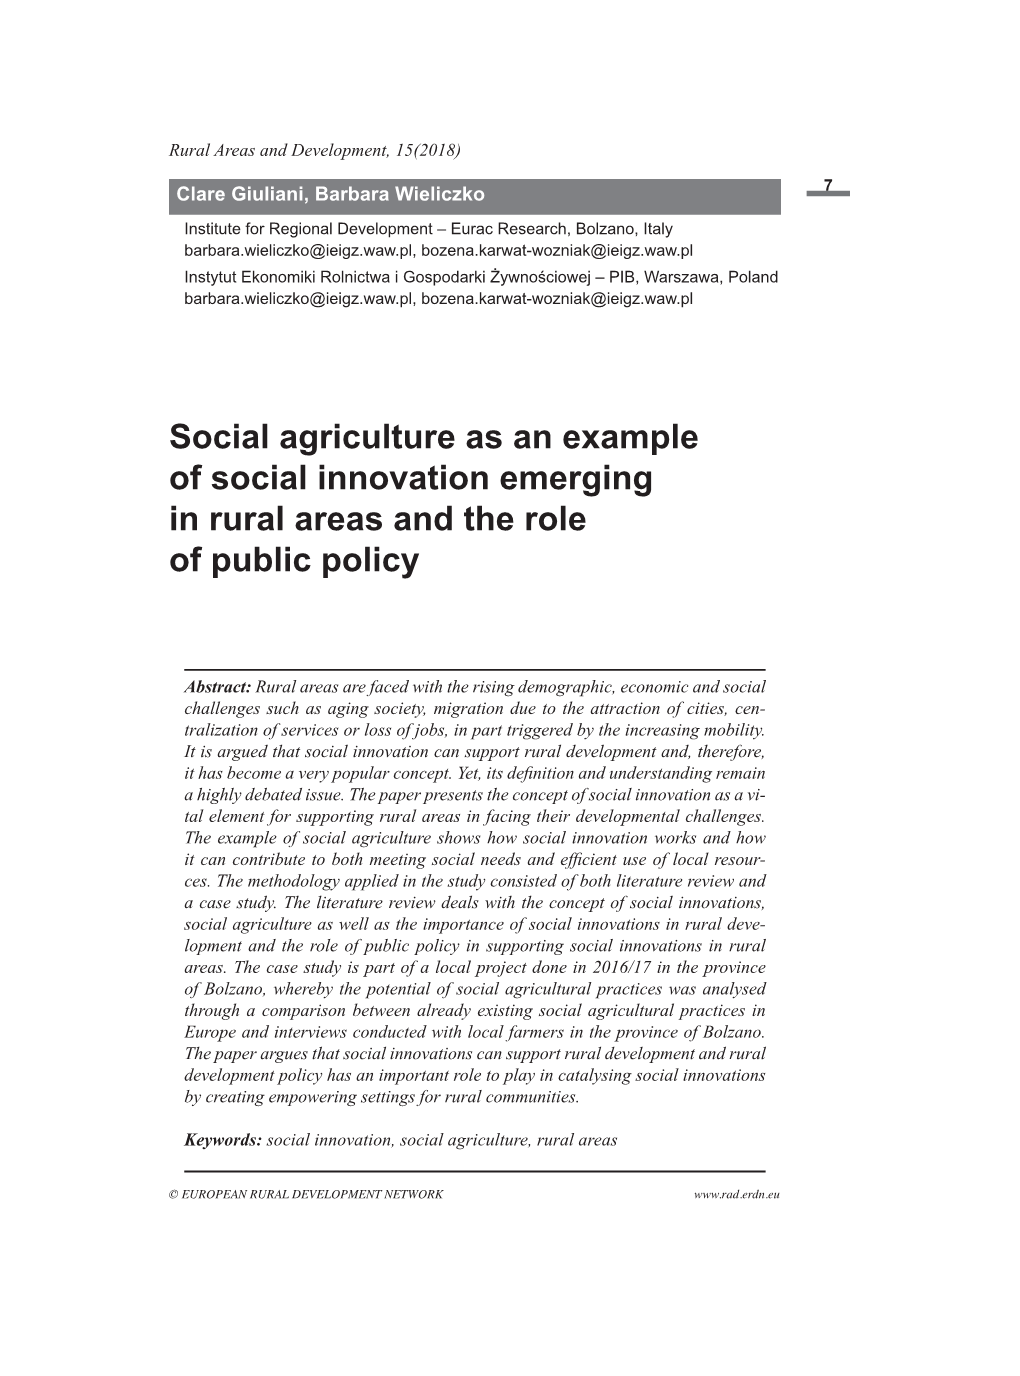 Social Agriculture As an Example of Social Innovation Emerging in Rural Areas and the Role of Public Policy